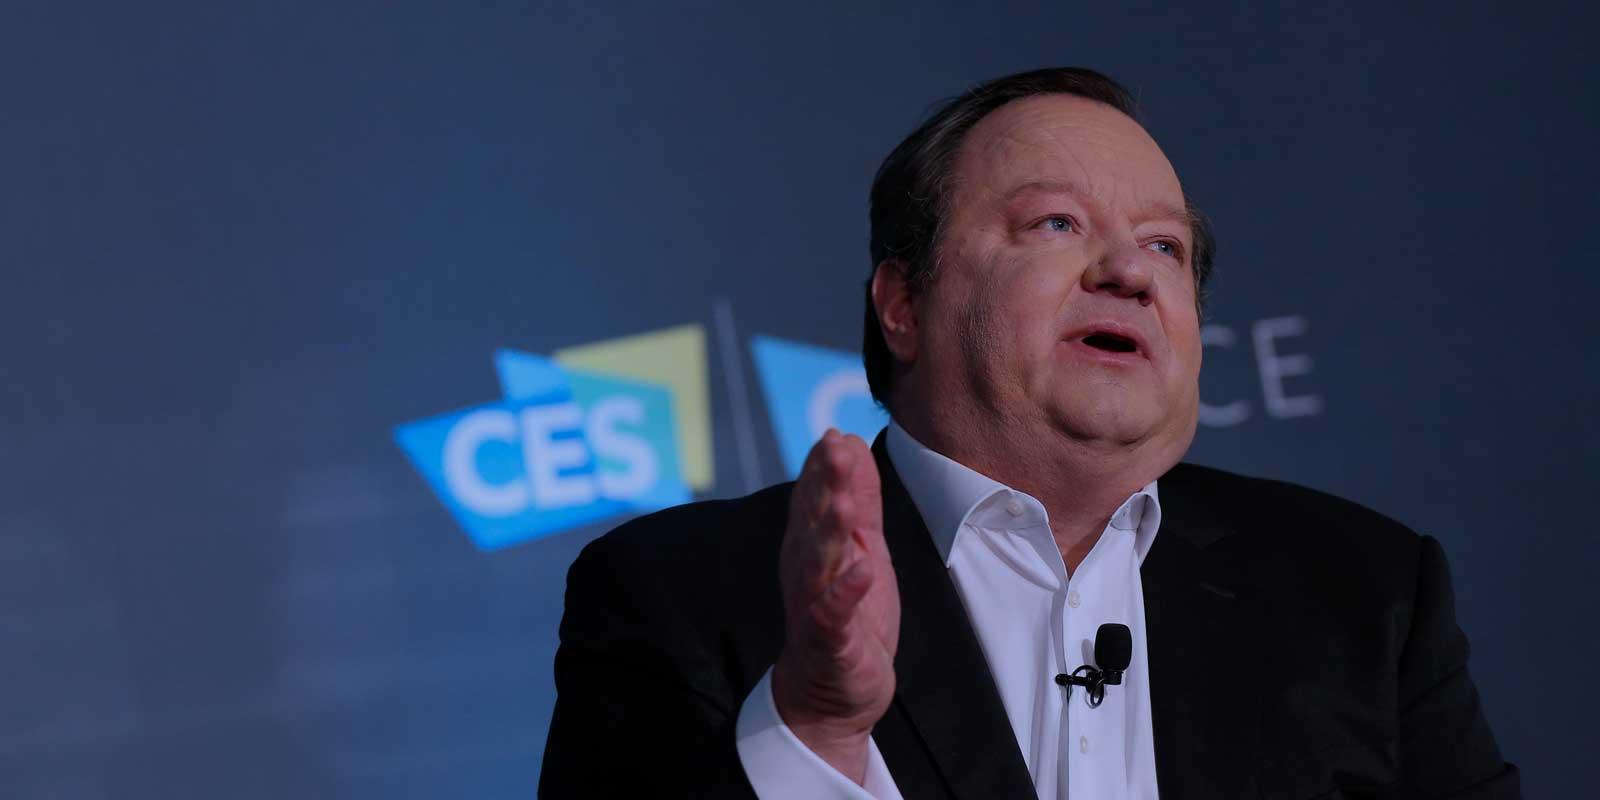 At CES, Viacom CEO Bob Bakish Highlights Transformation and Opportunities